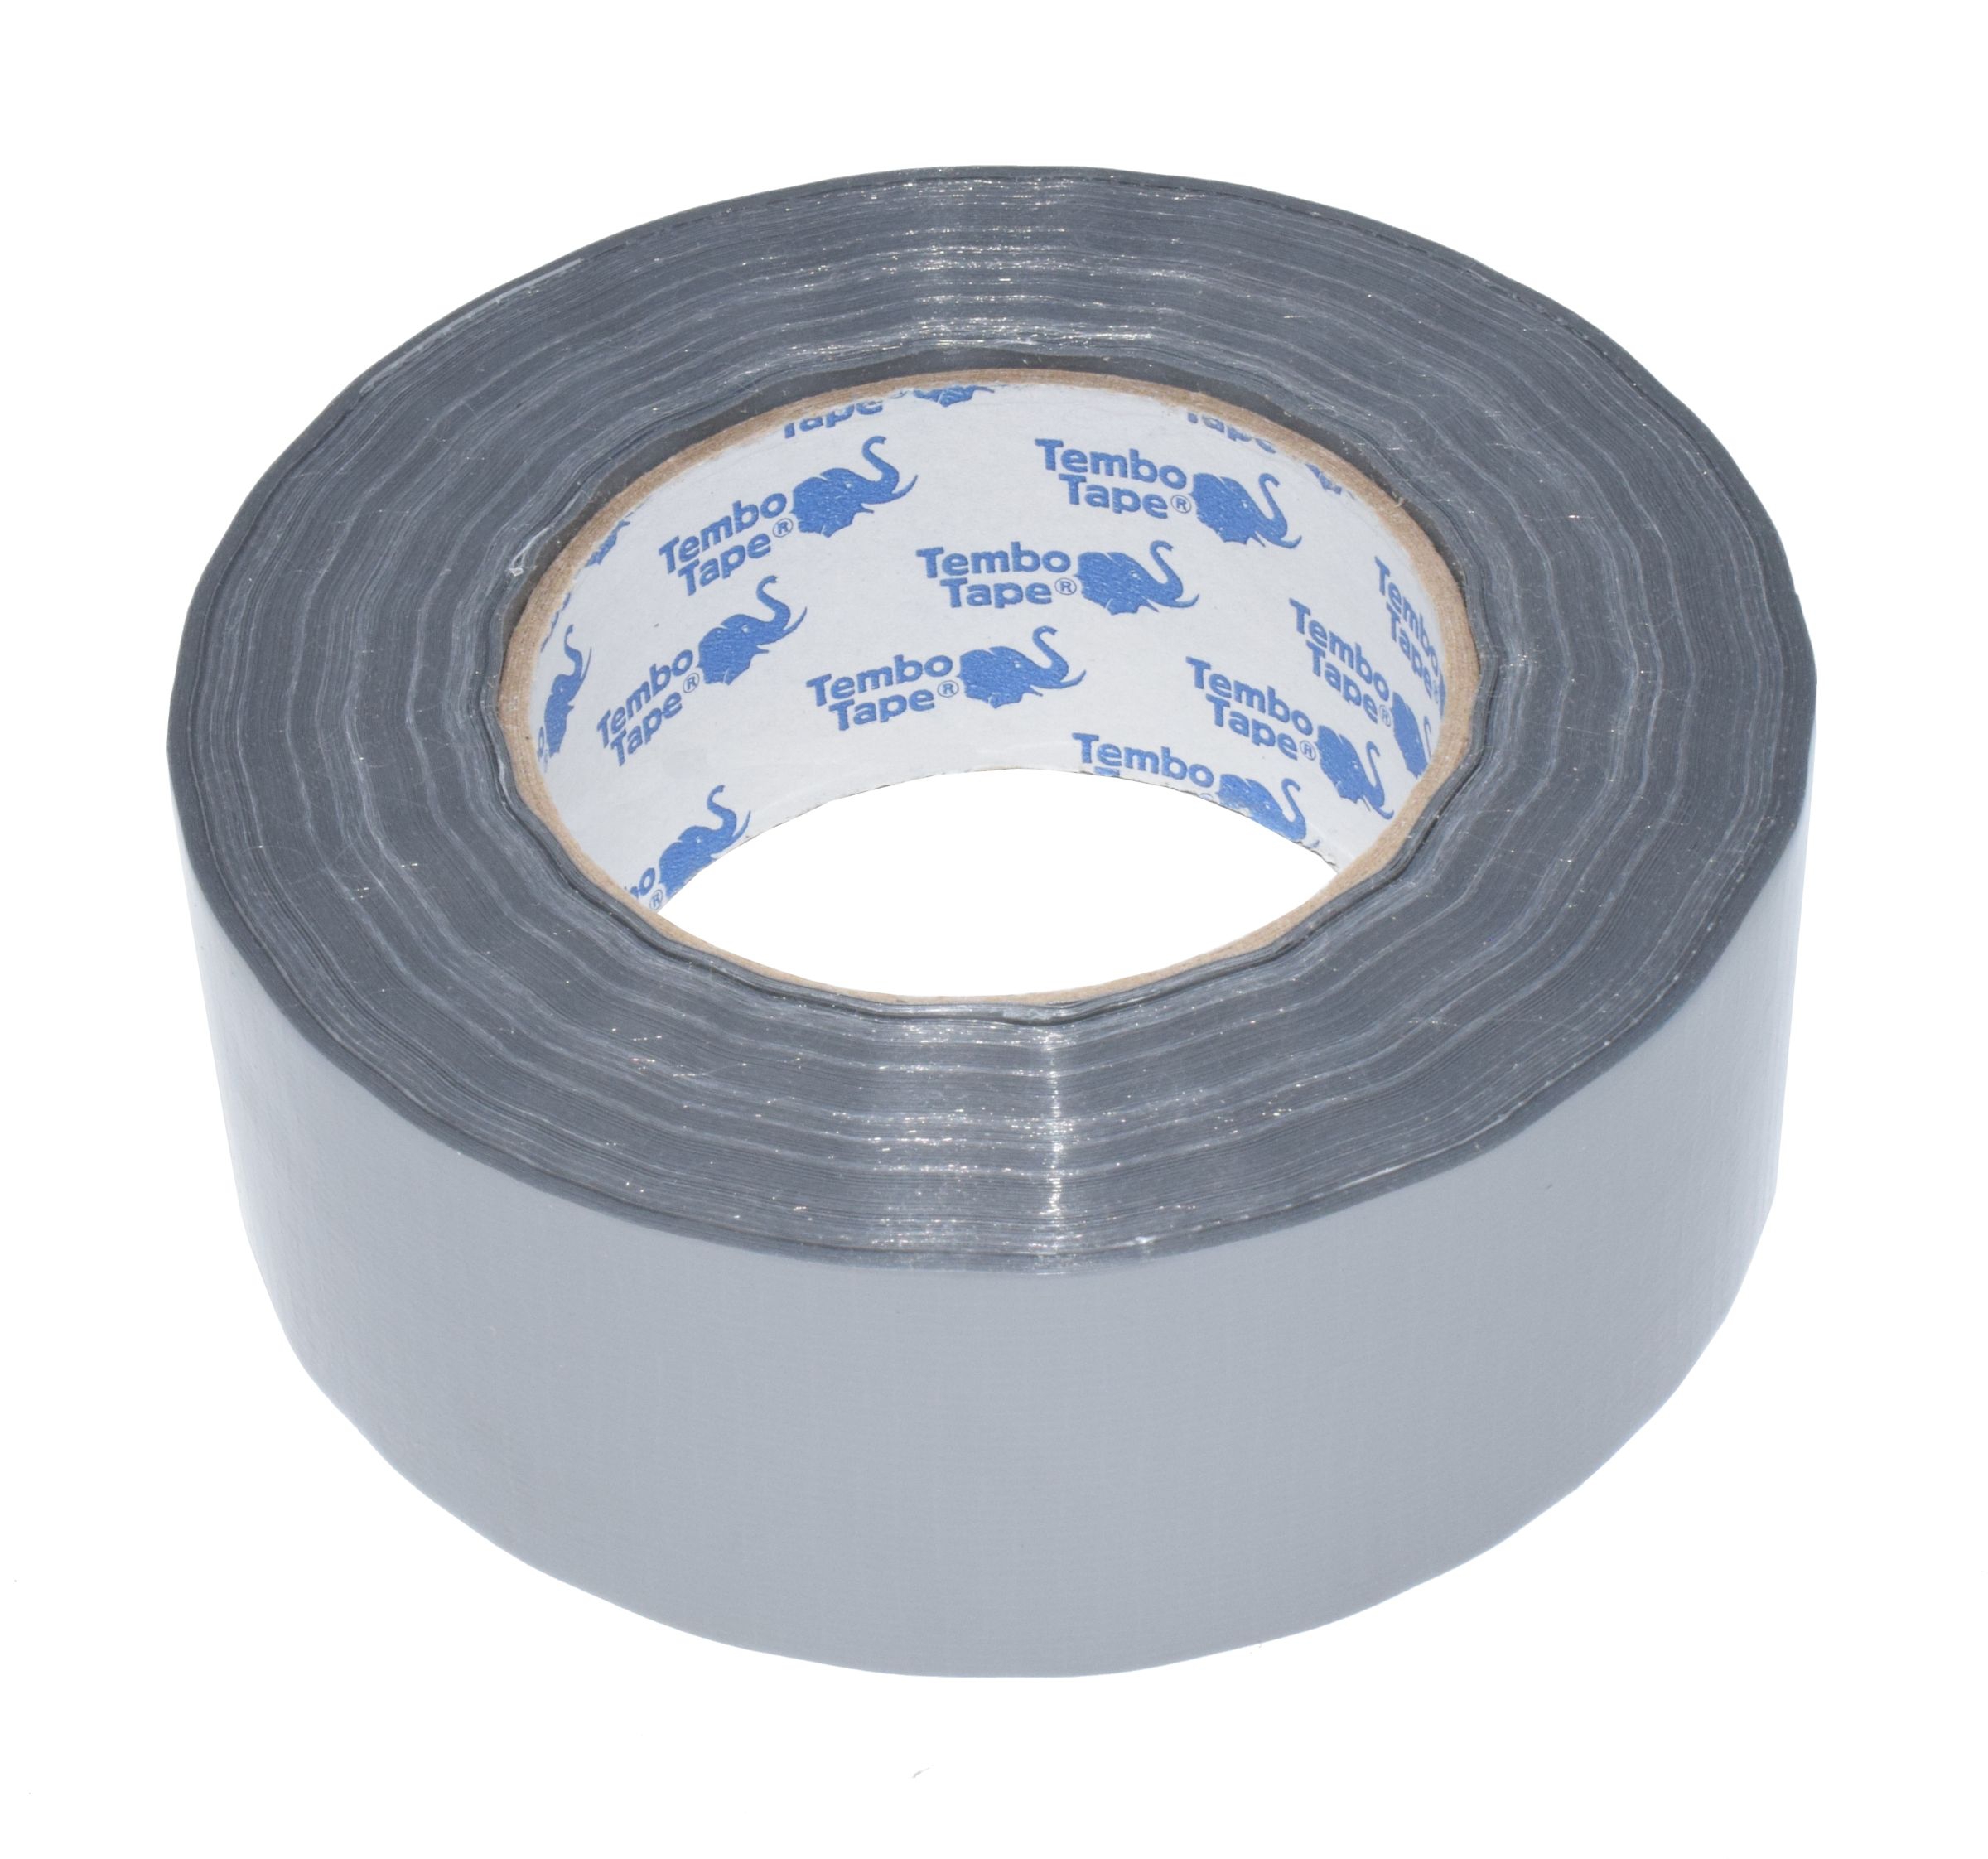 Tembo Tape® Duct Tape silver